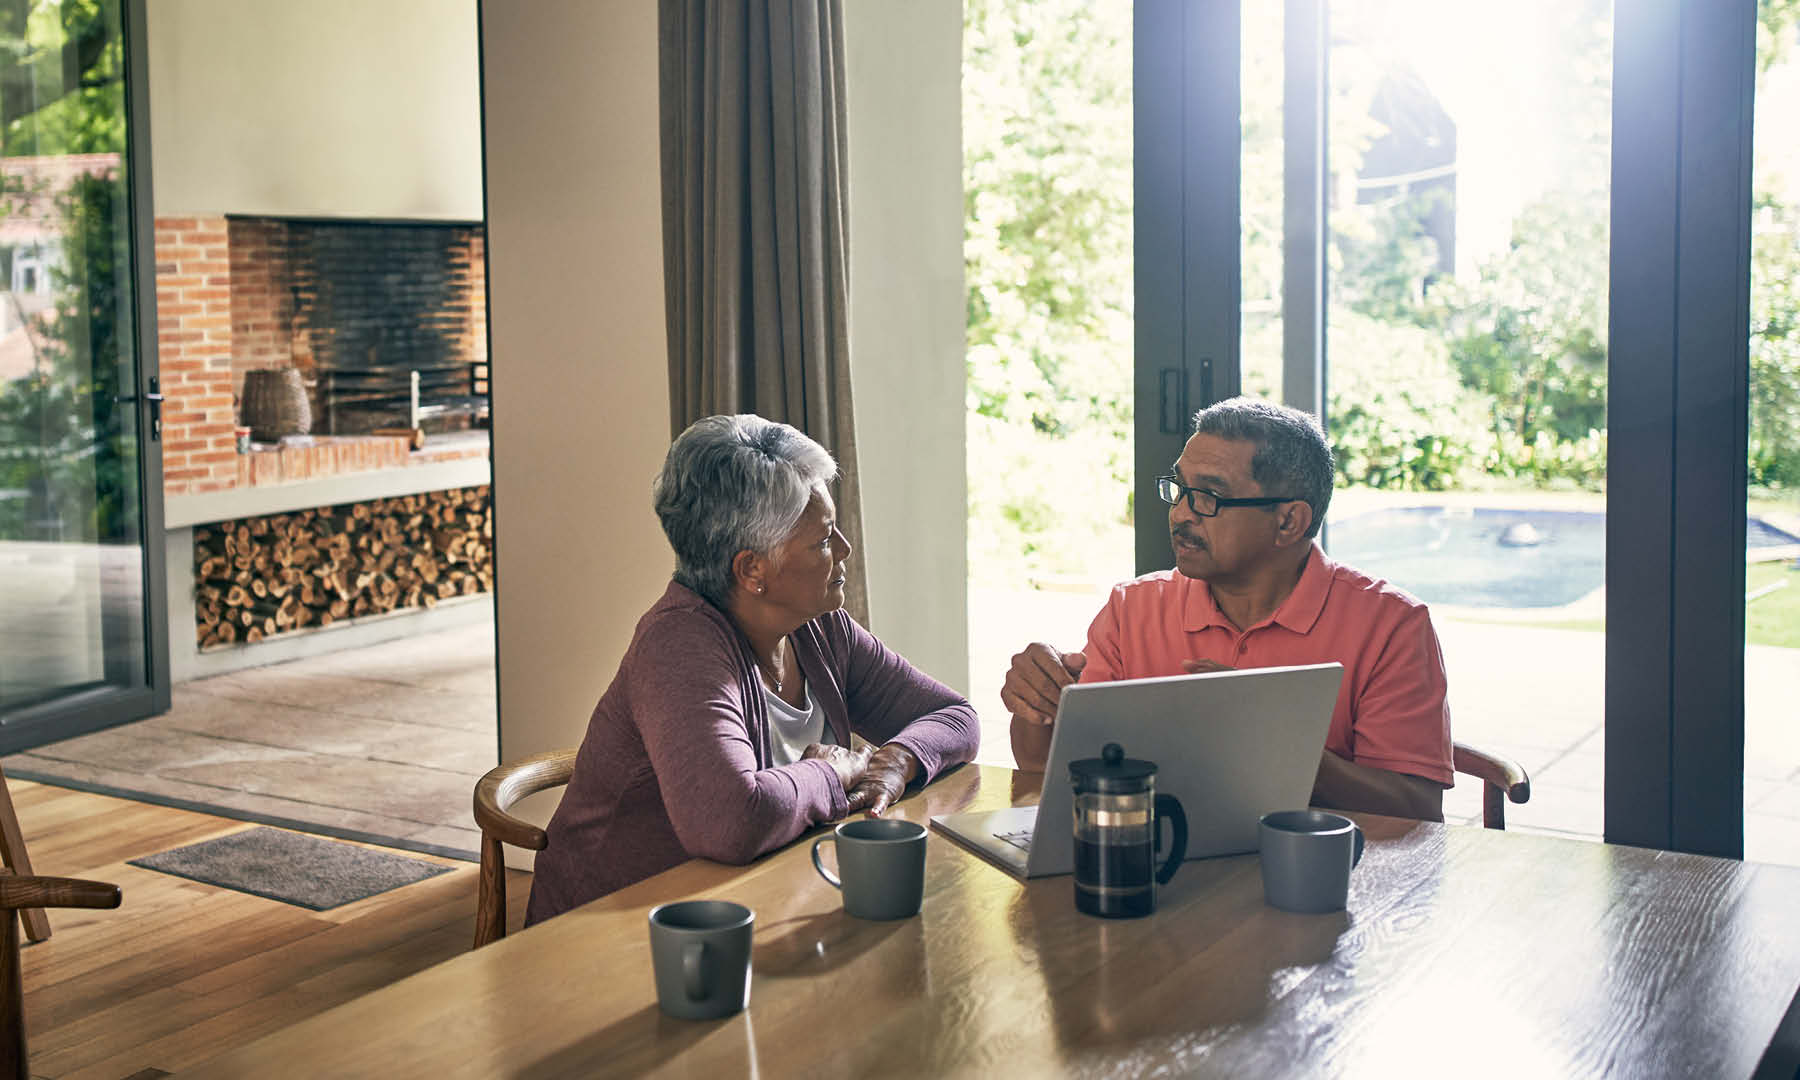 Explore Ways to Generate and Protect Retirement Income